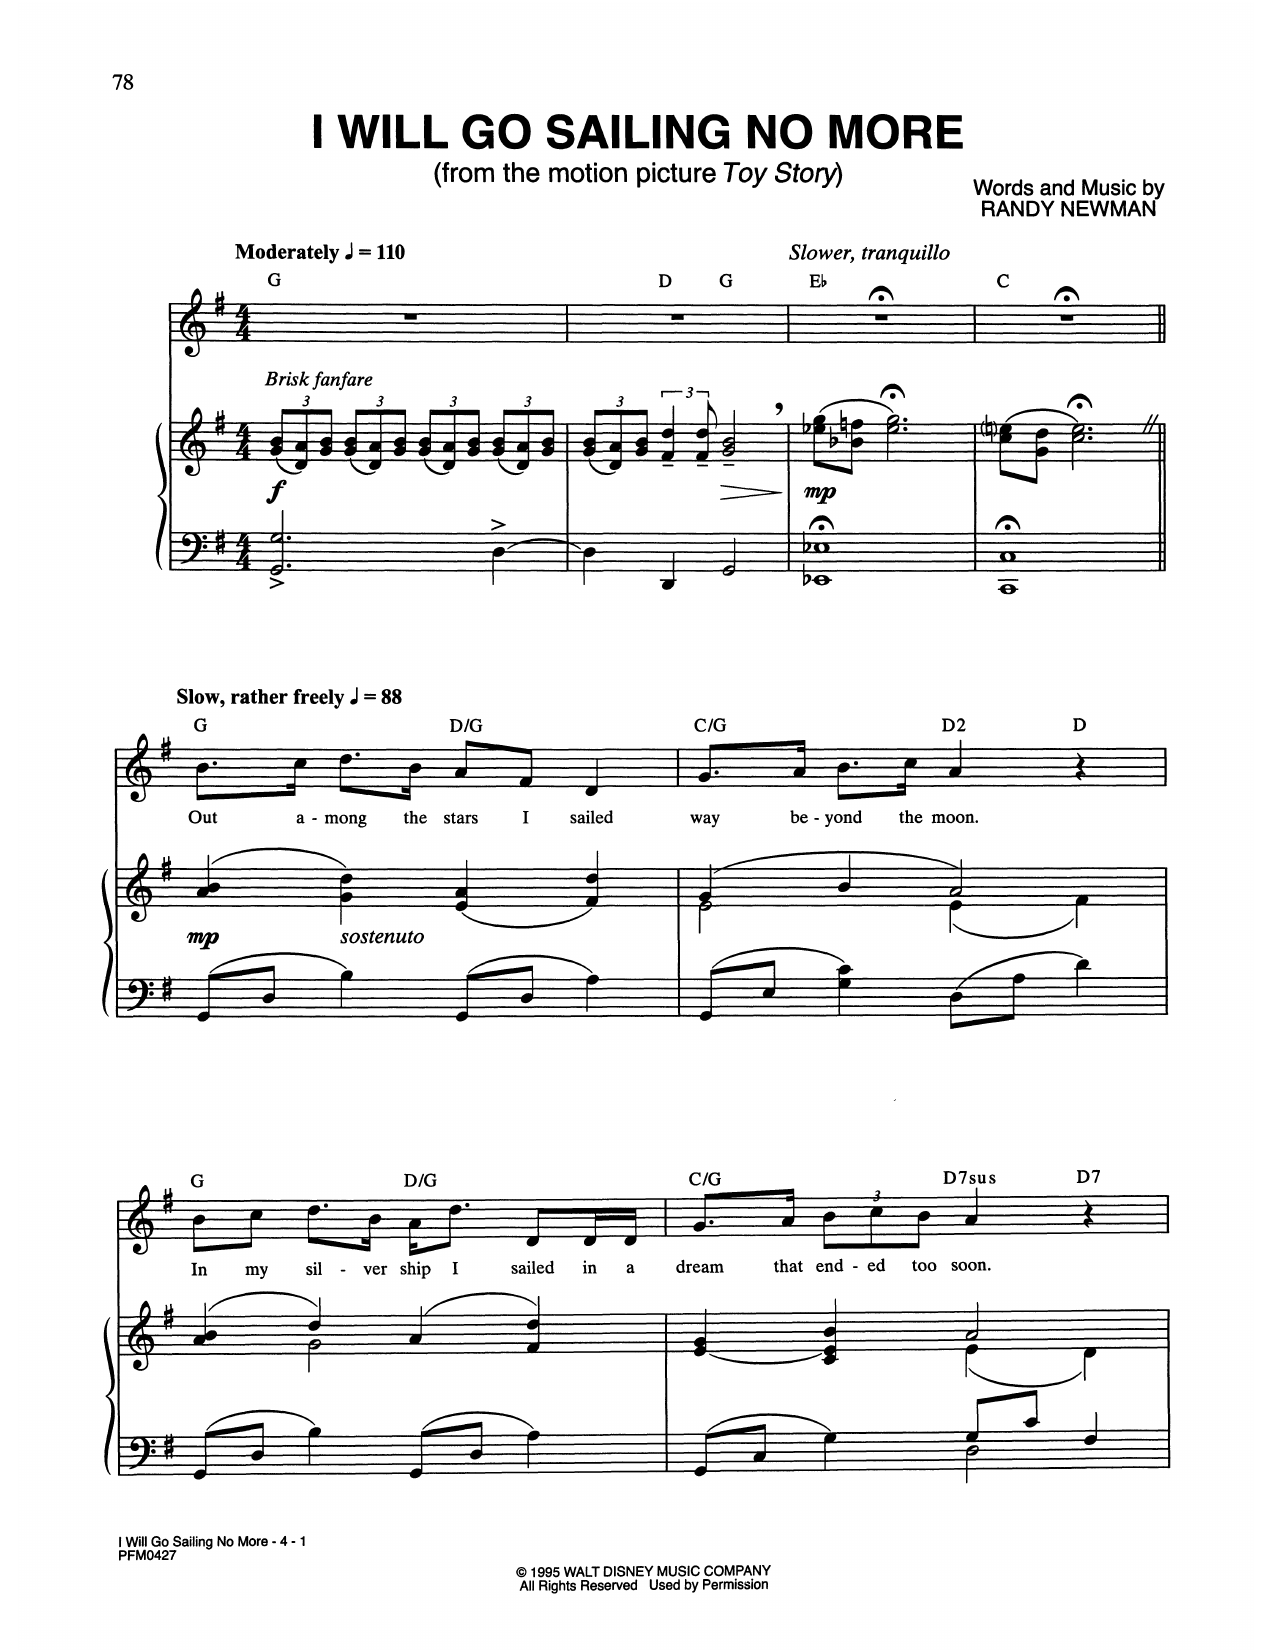 Download Randy Newman I Will Go Sailing No More (from Toy Sto Sheet Music